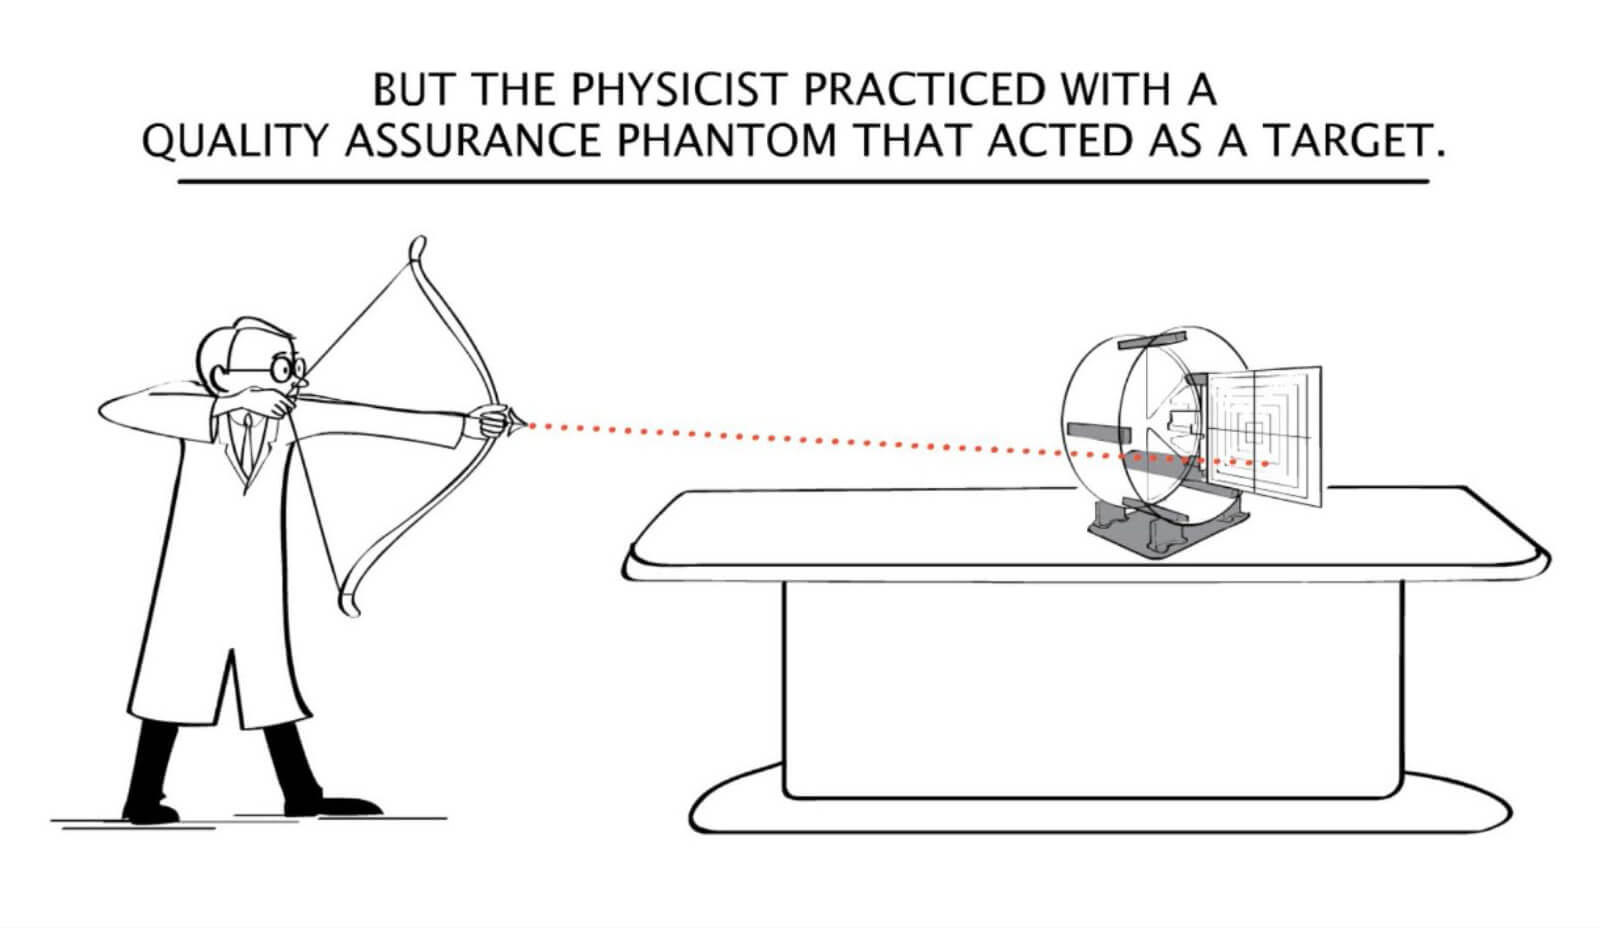 But the physicist practiced with a quality assurance phantom that acted as a target.